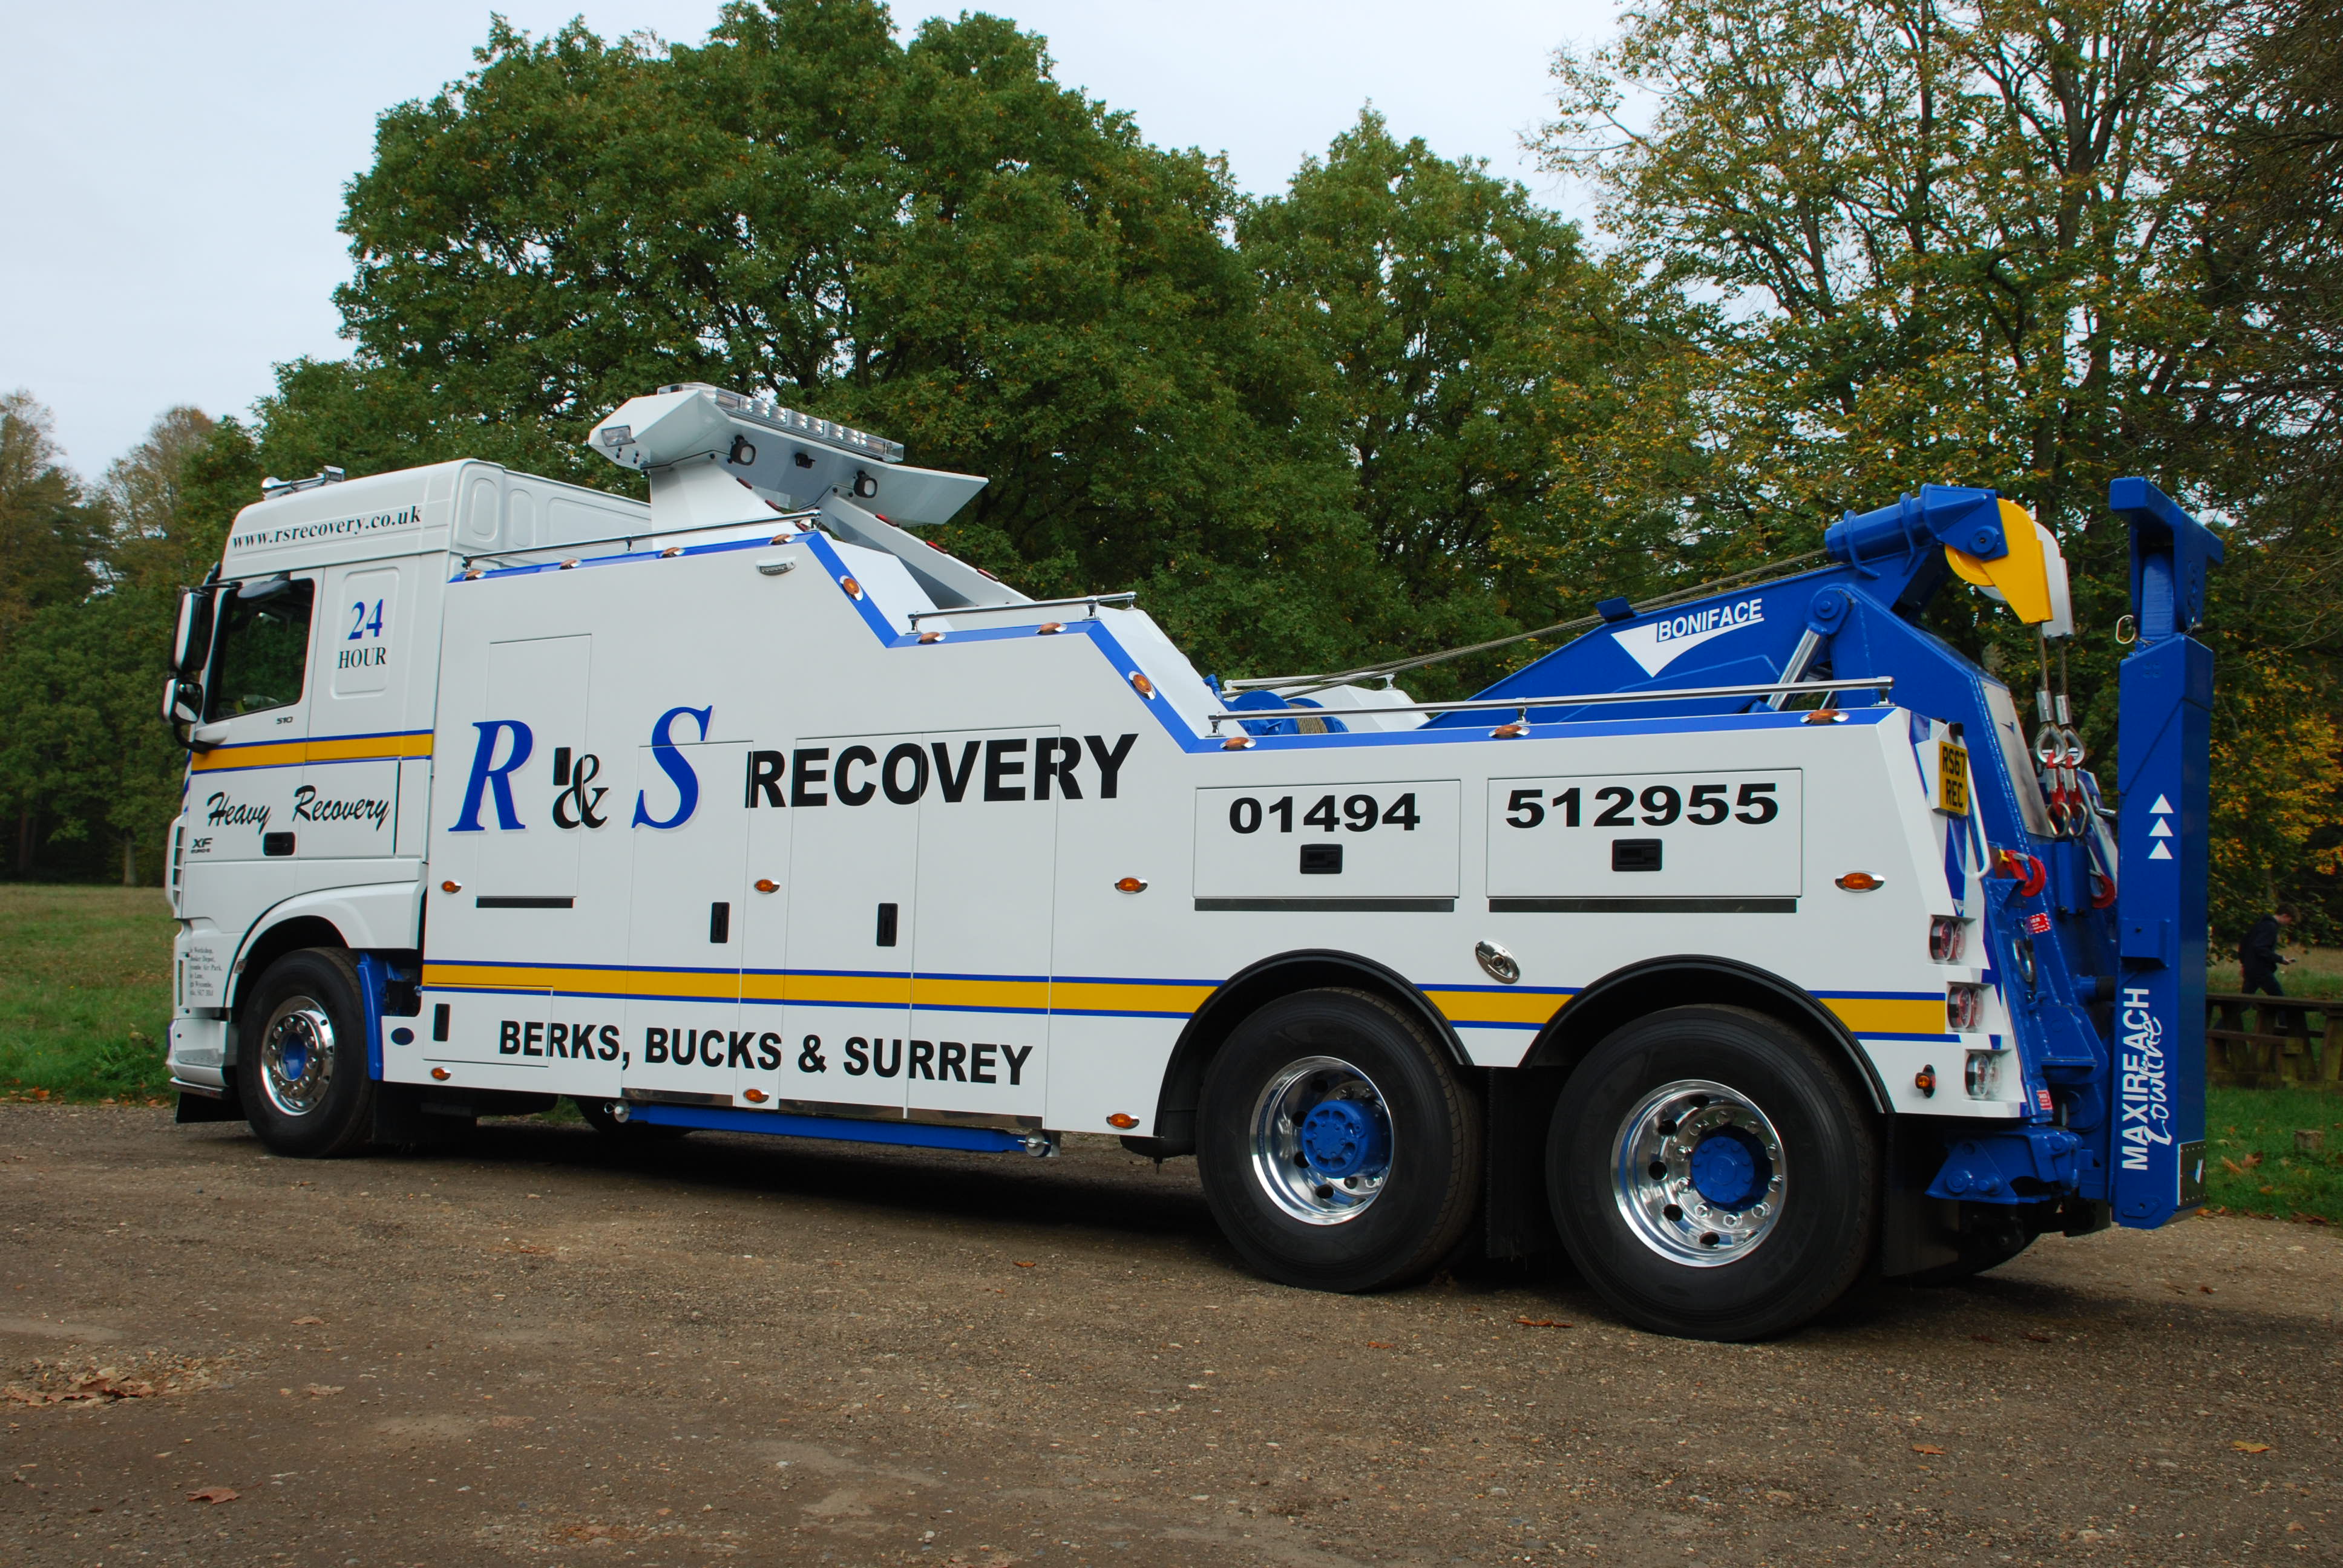 BONIFACE INTERSTATER FOR R&S RECOVERY